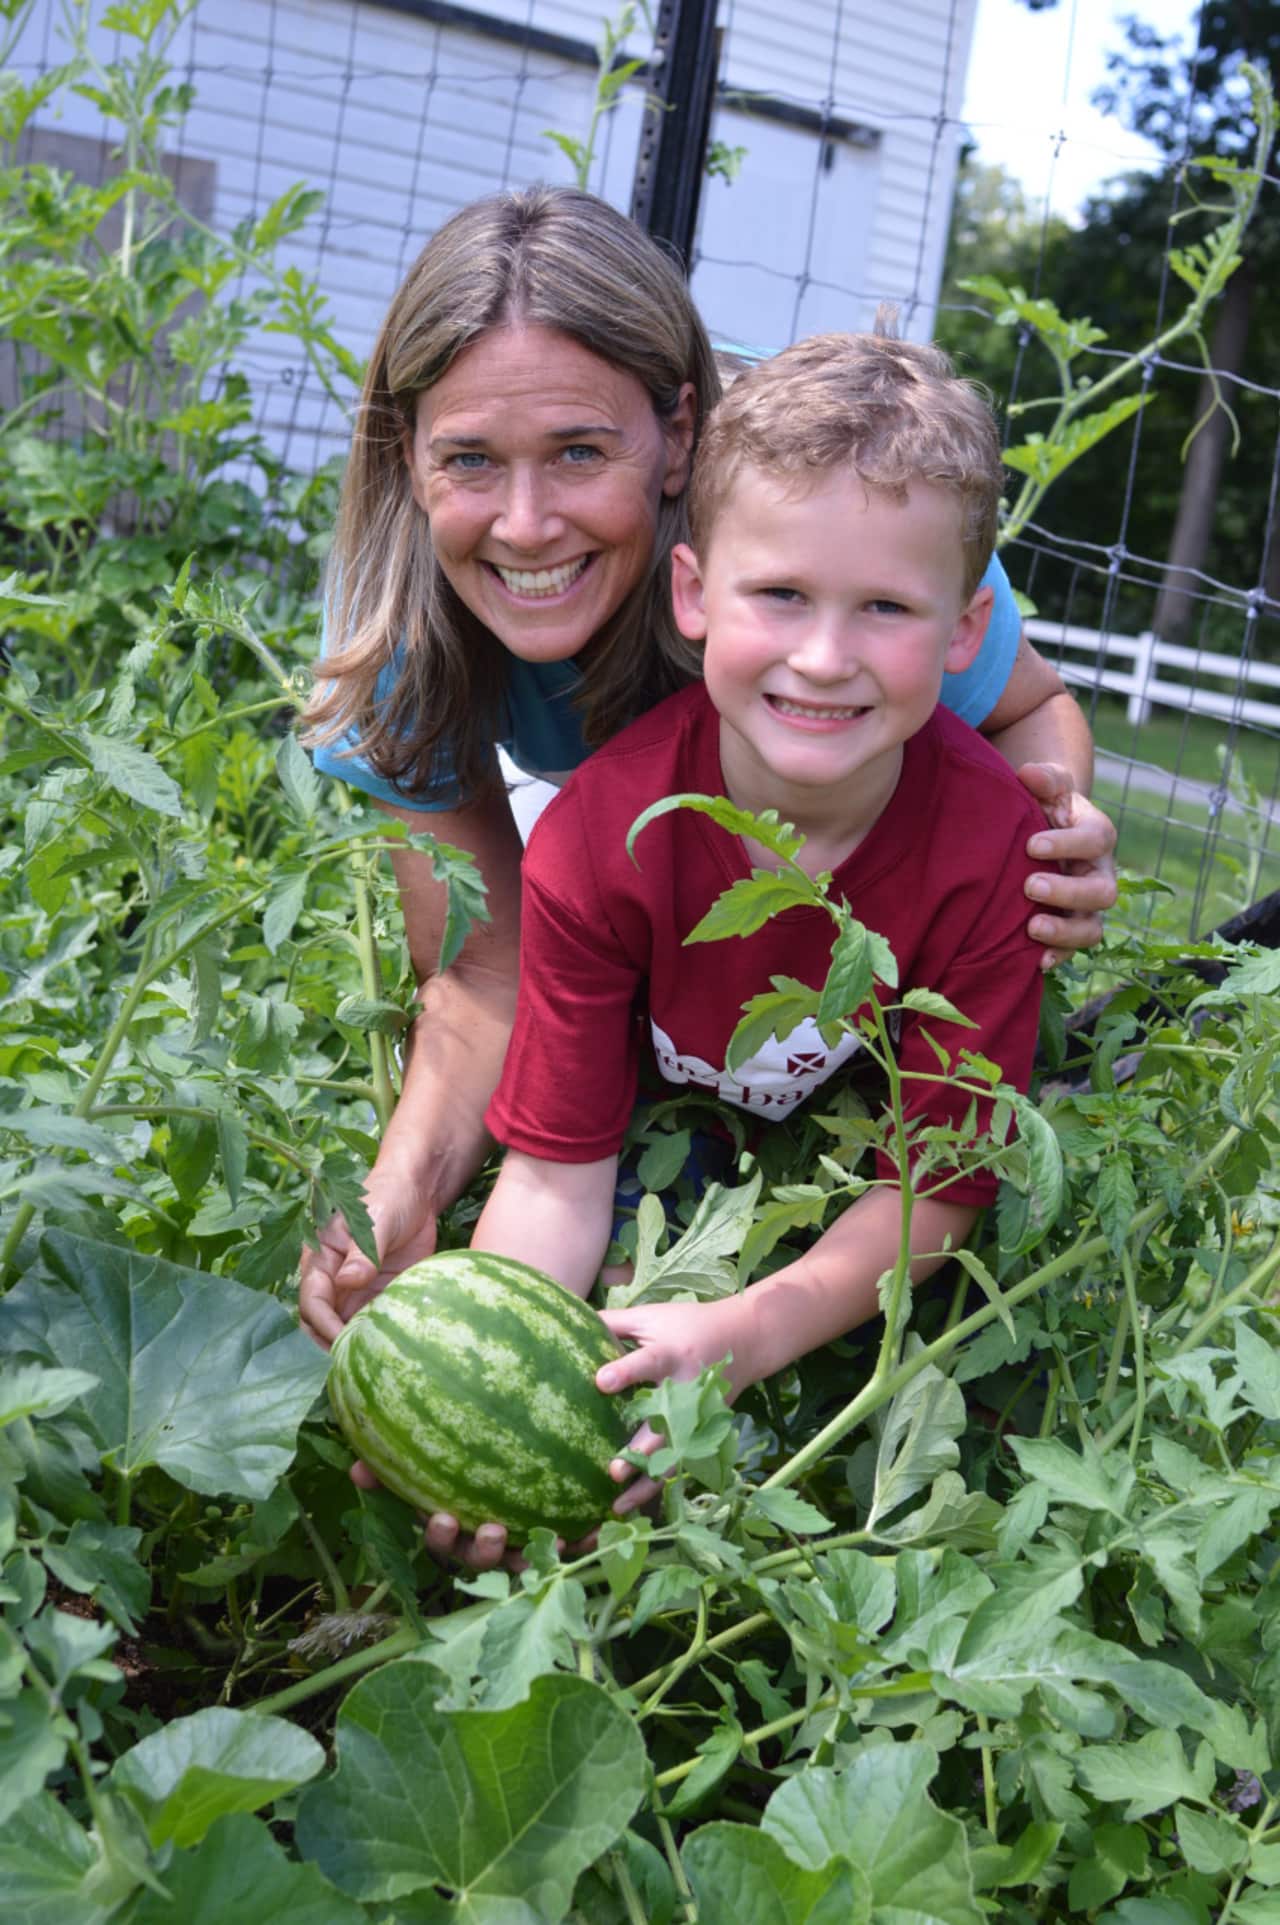 Ridgewood HealthBarn's Stacey Antine and camper Russ Romond of Wyckoff with the garden's first ever watermelon.